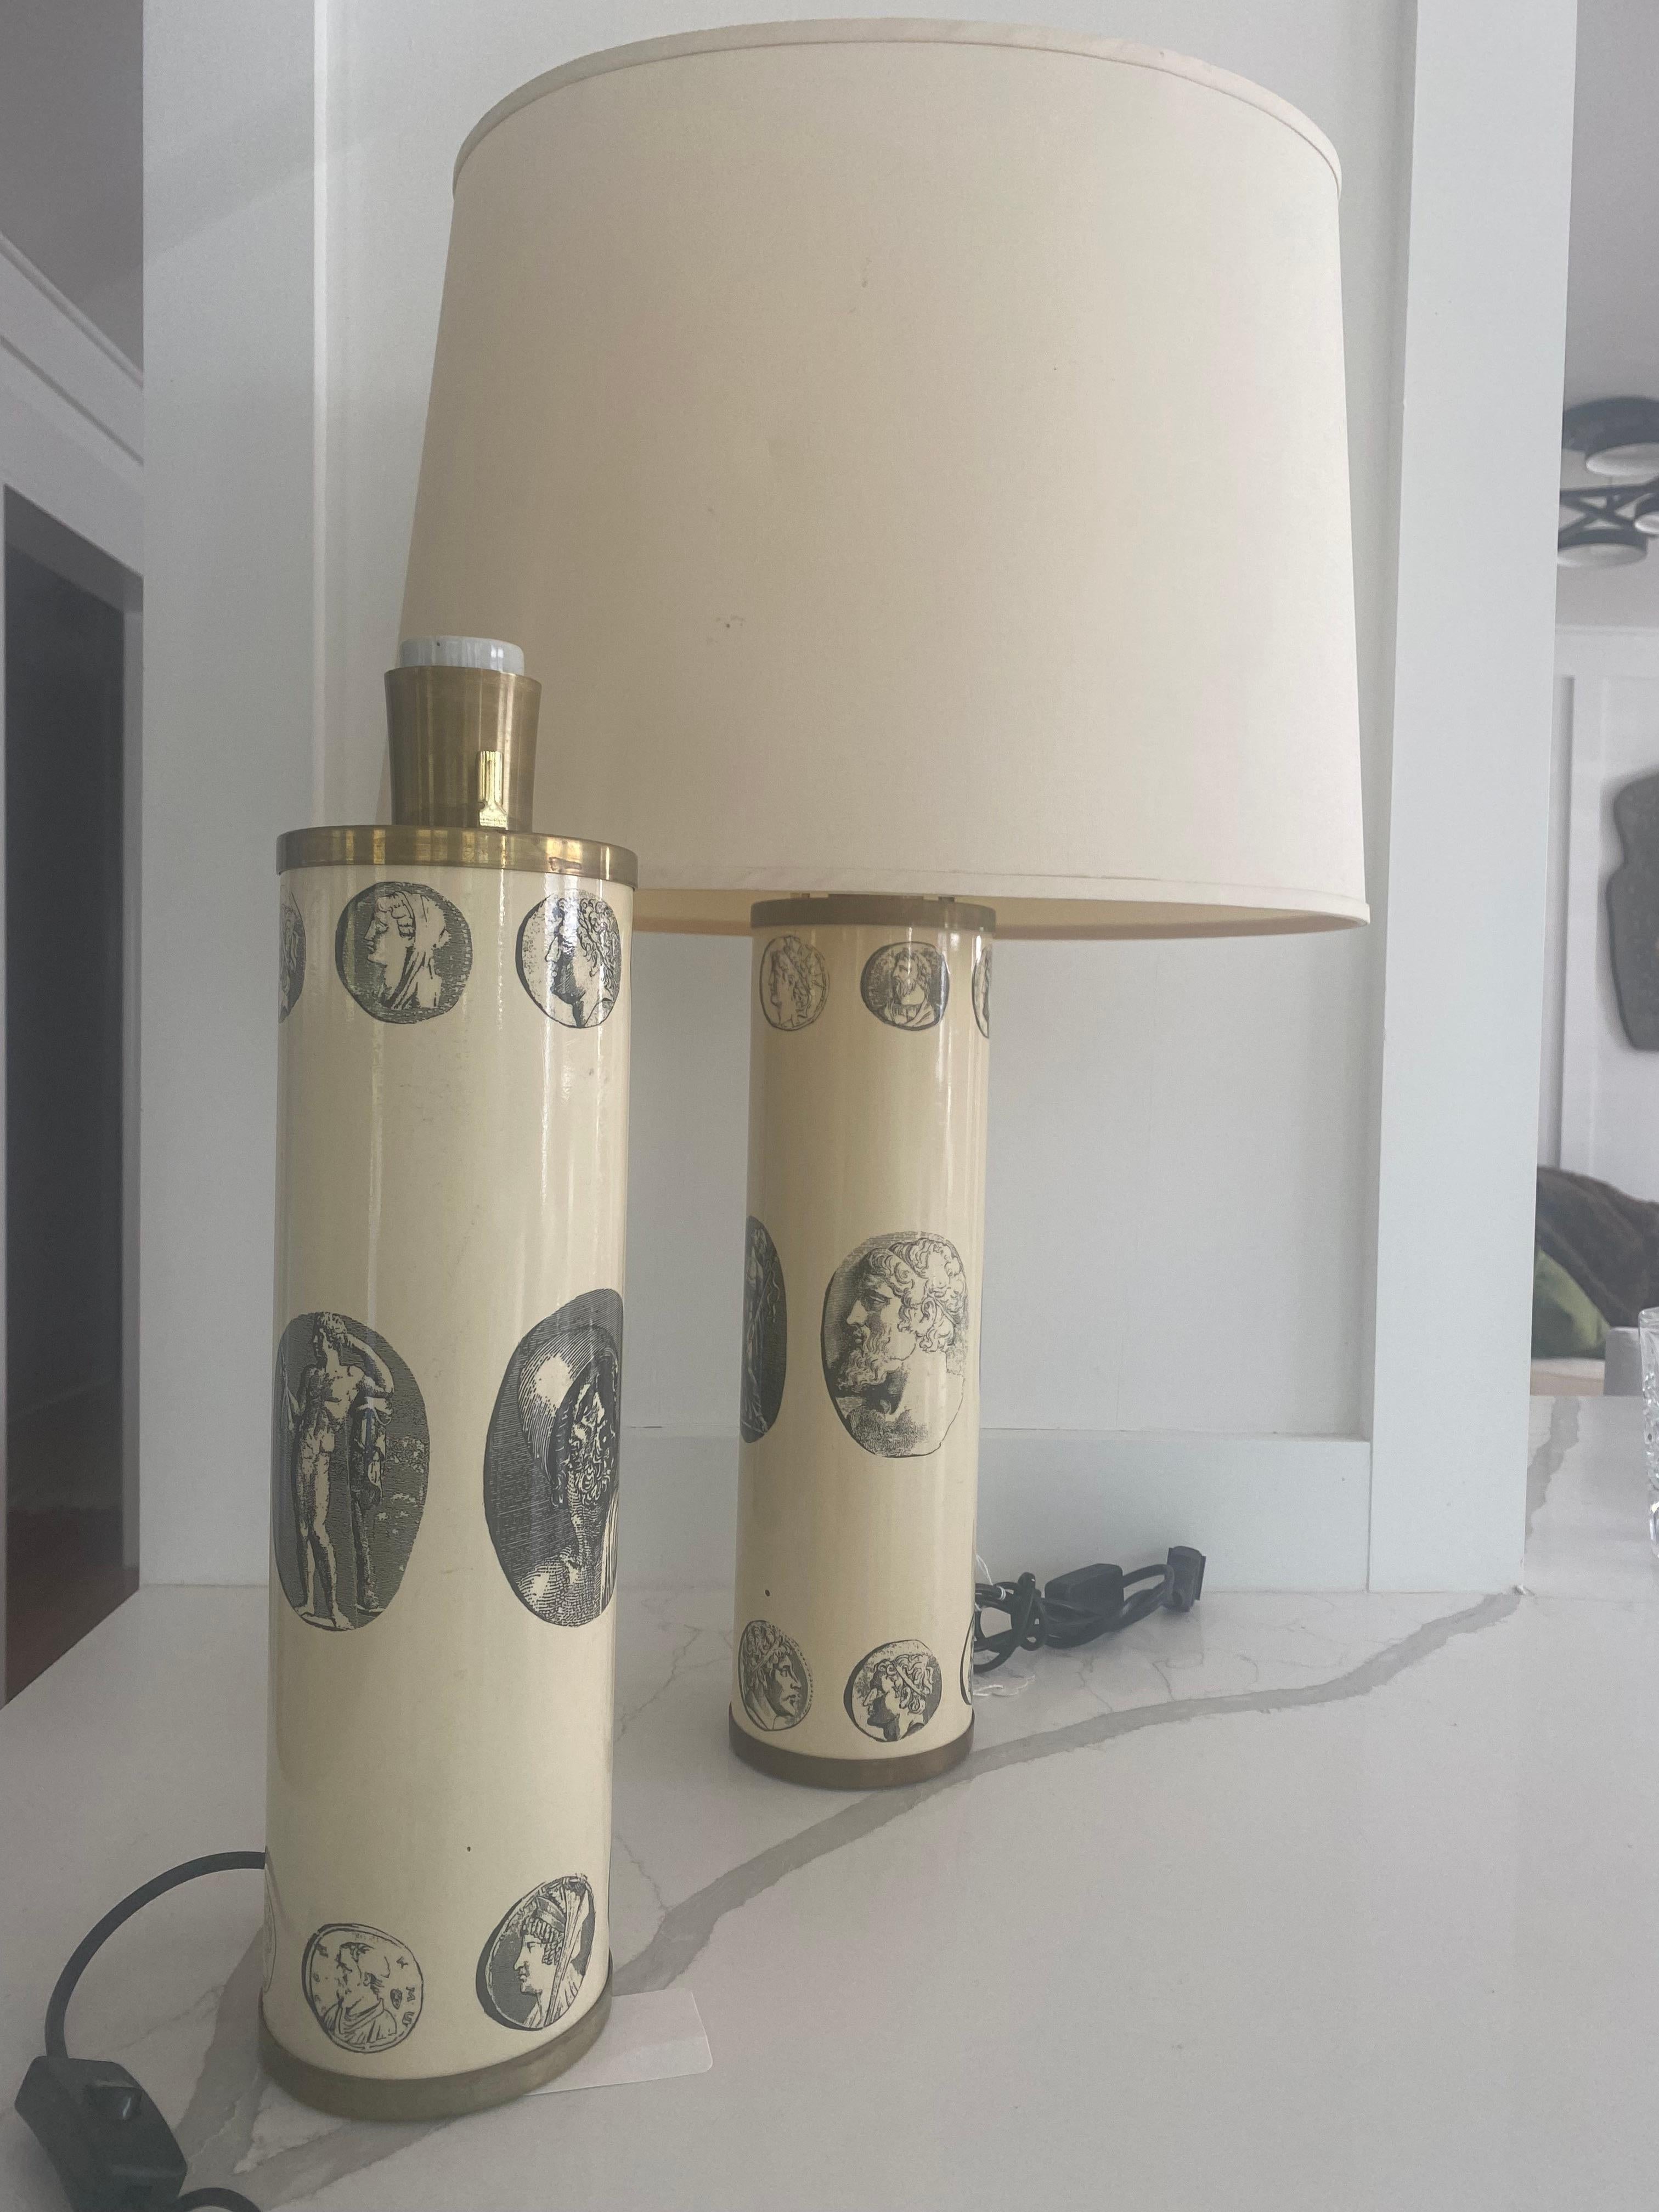 Pair of Fornasetti Table Lamps Cammei Cameo Black with White Italy Midcentury  For Sale 1